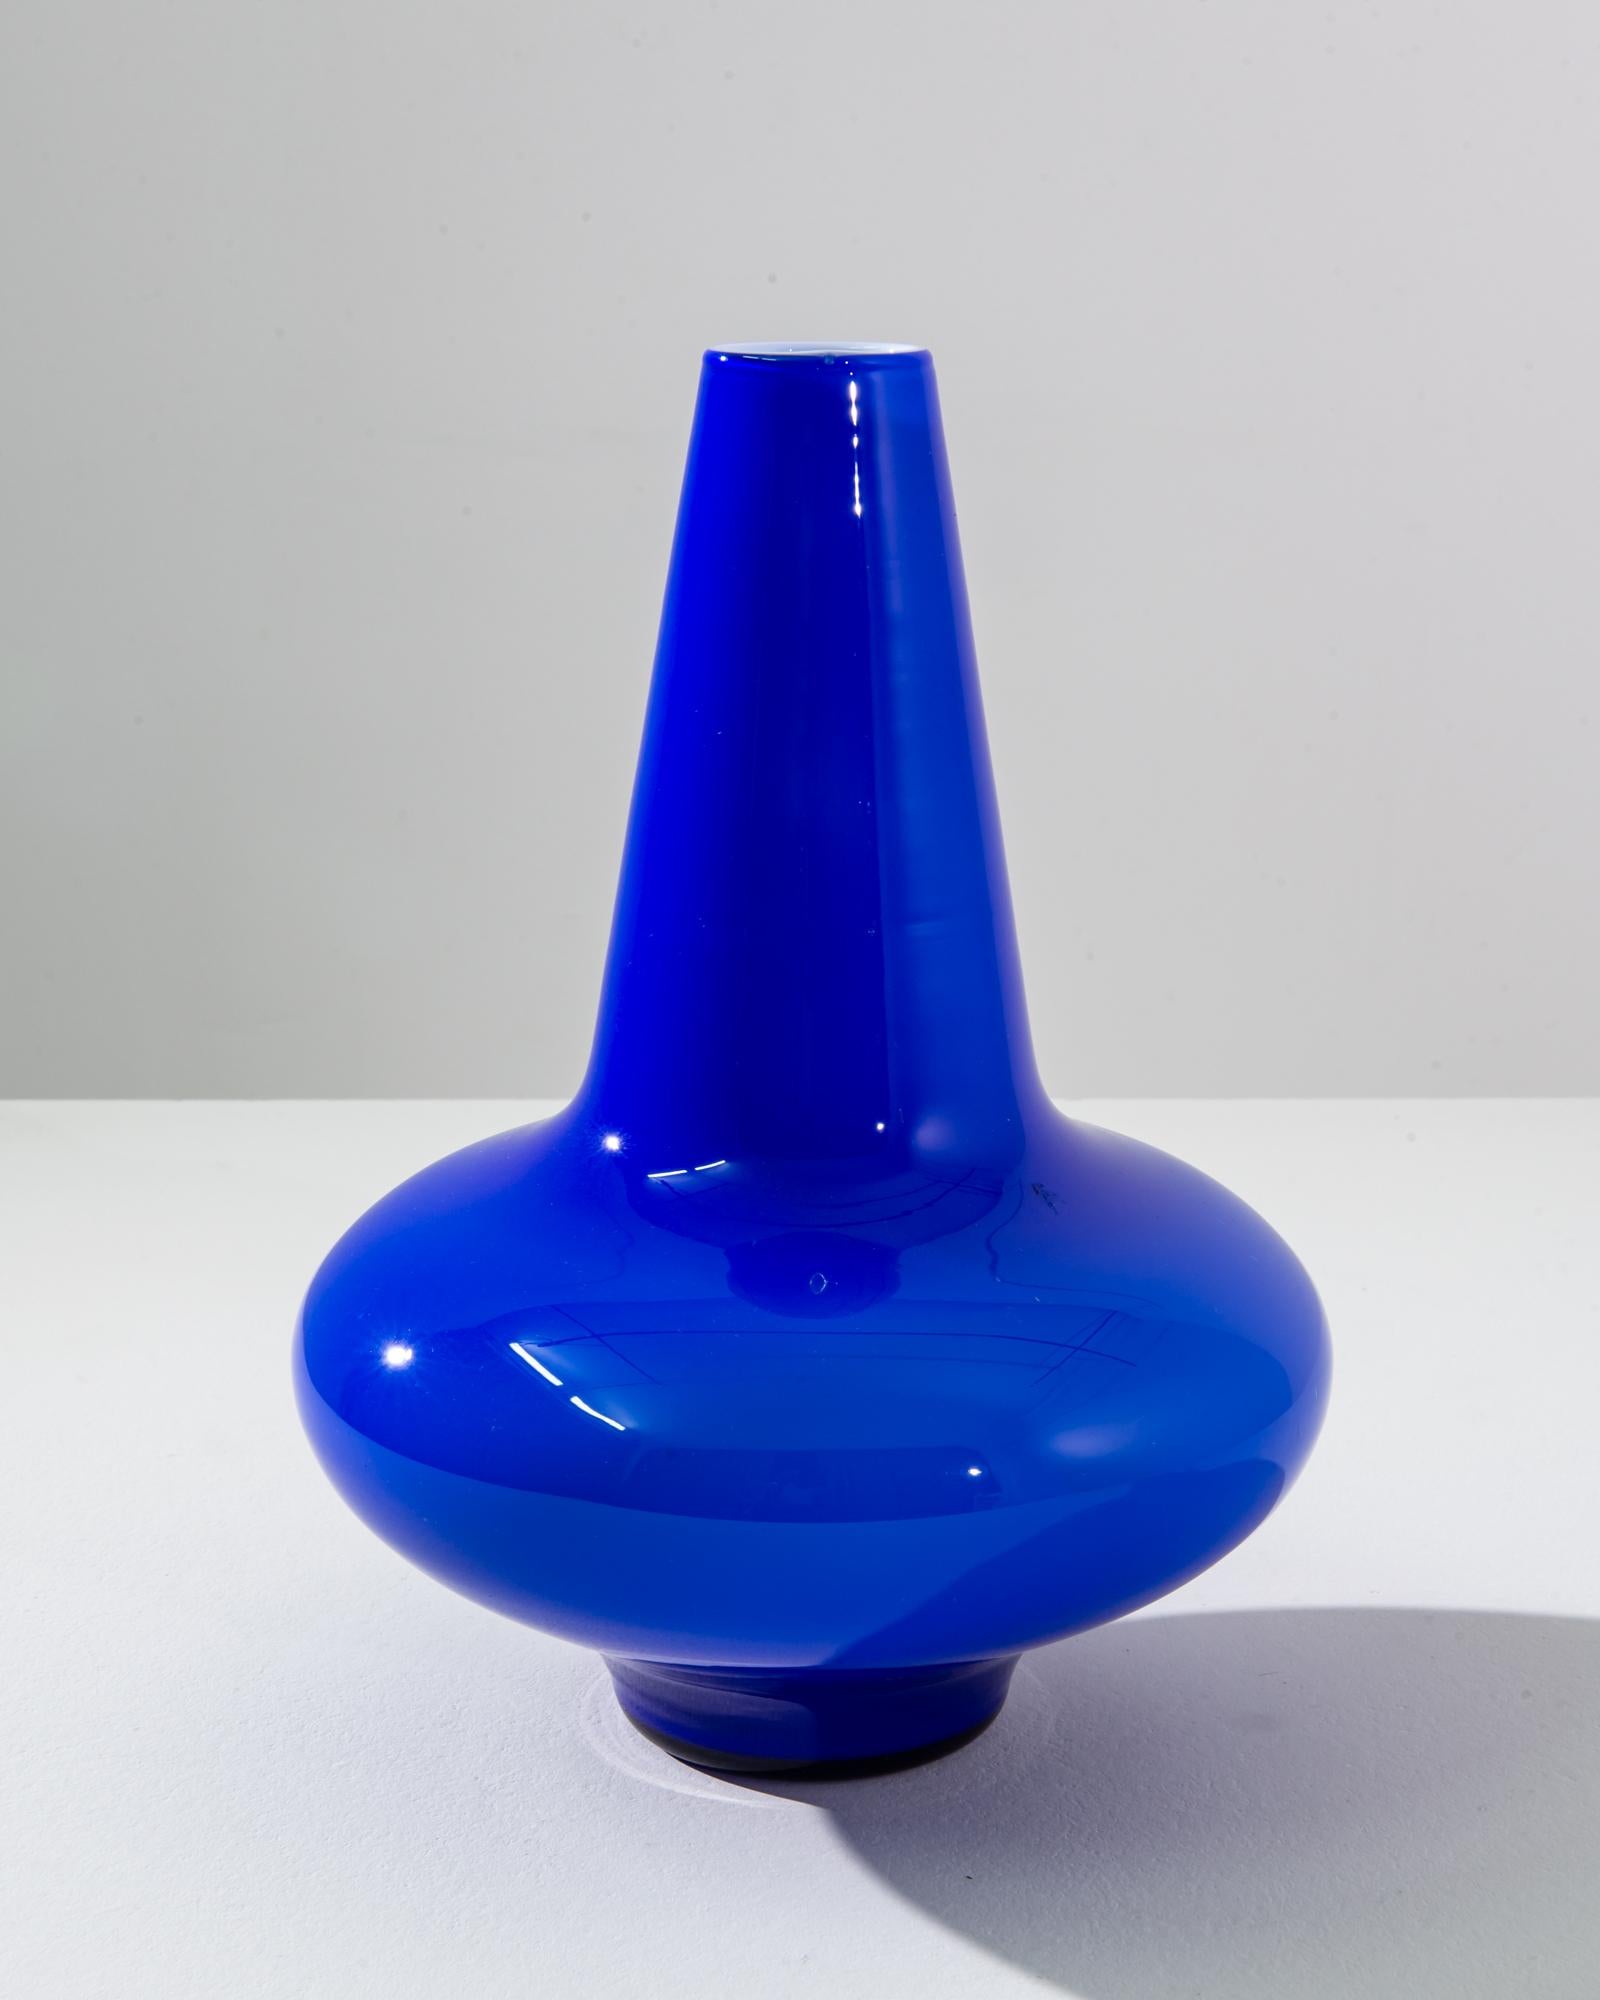 This striking 1960s Italian blue glass vase is a true emblem of mid-century modern design, boasting a vibrant cobalt blue that instantly captivates and adds a splash of color to any room. Its sleek, conical neck gracefully rises from the bulbous